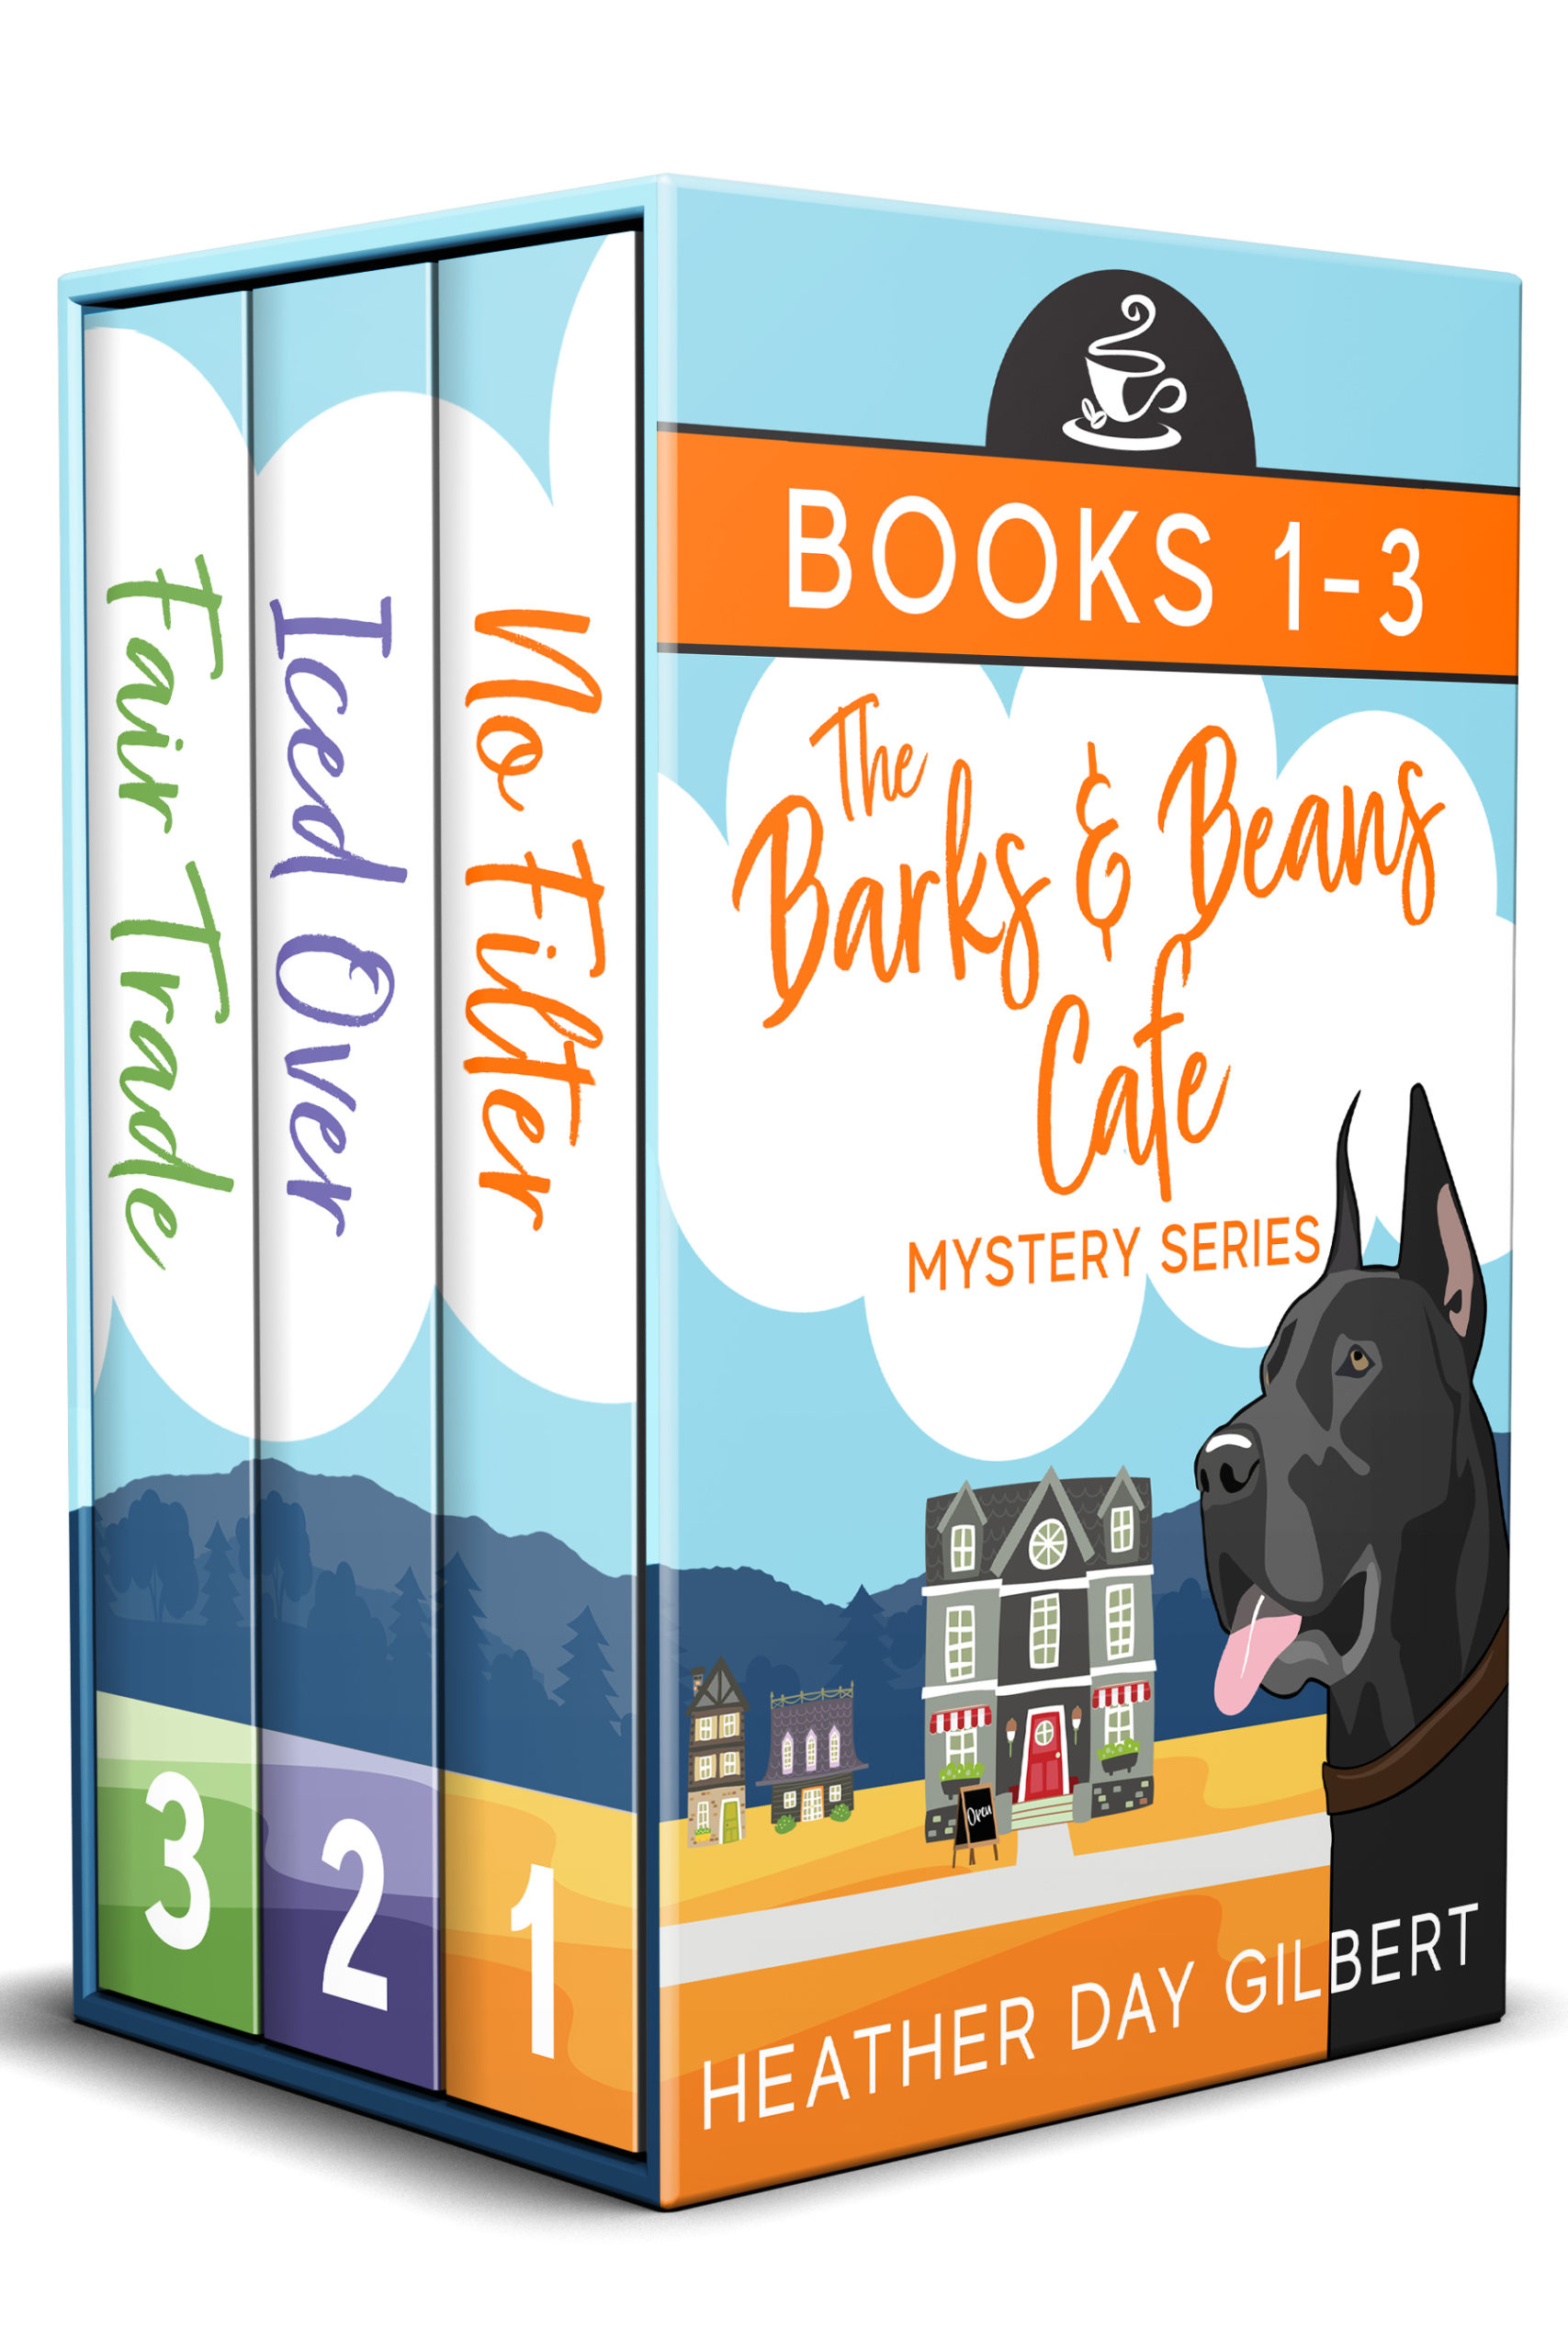 The Barks & Beans Cafe Mystery Series Volume 1: Books 1-3